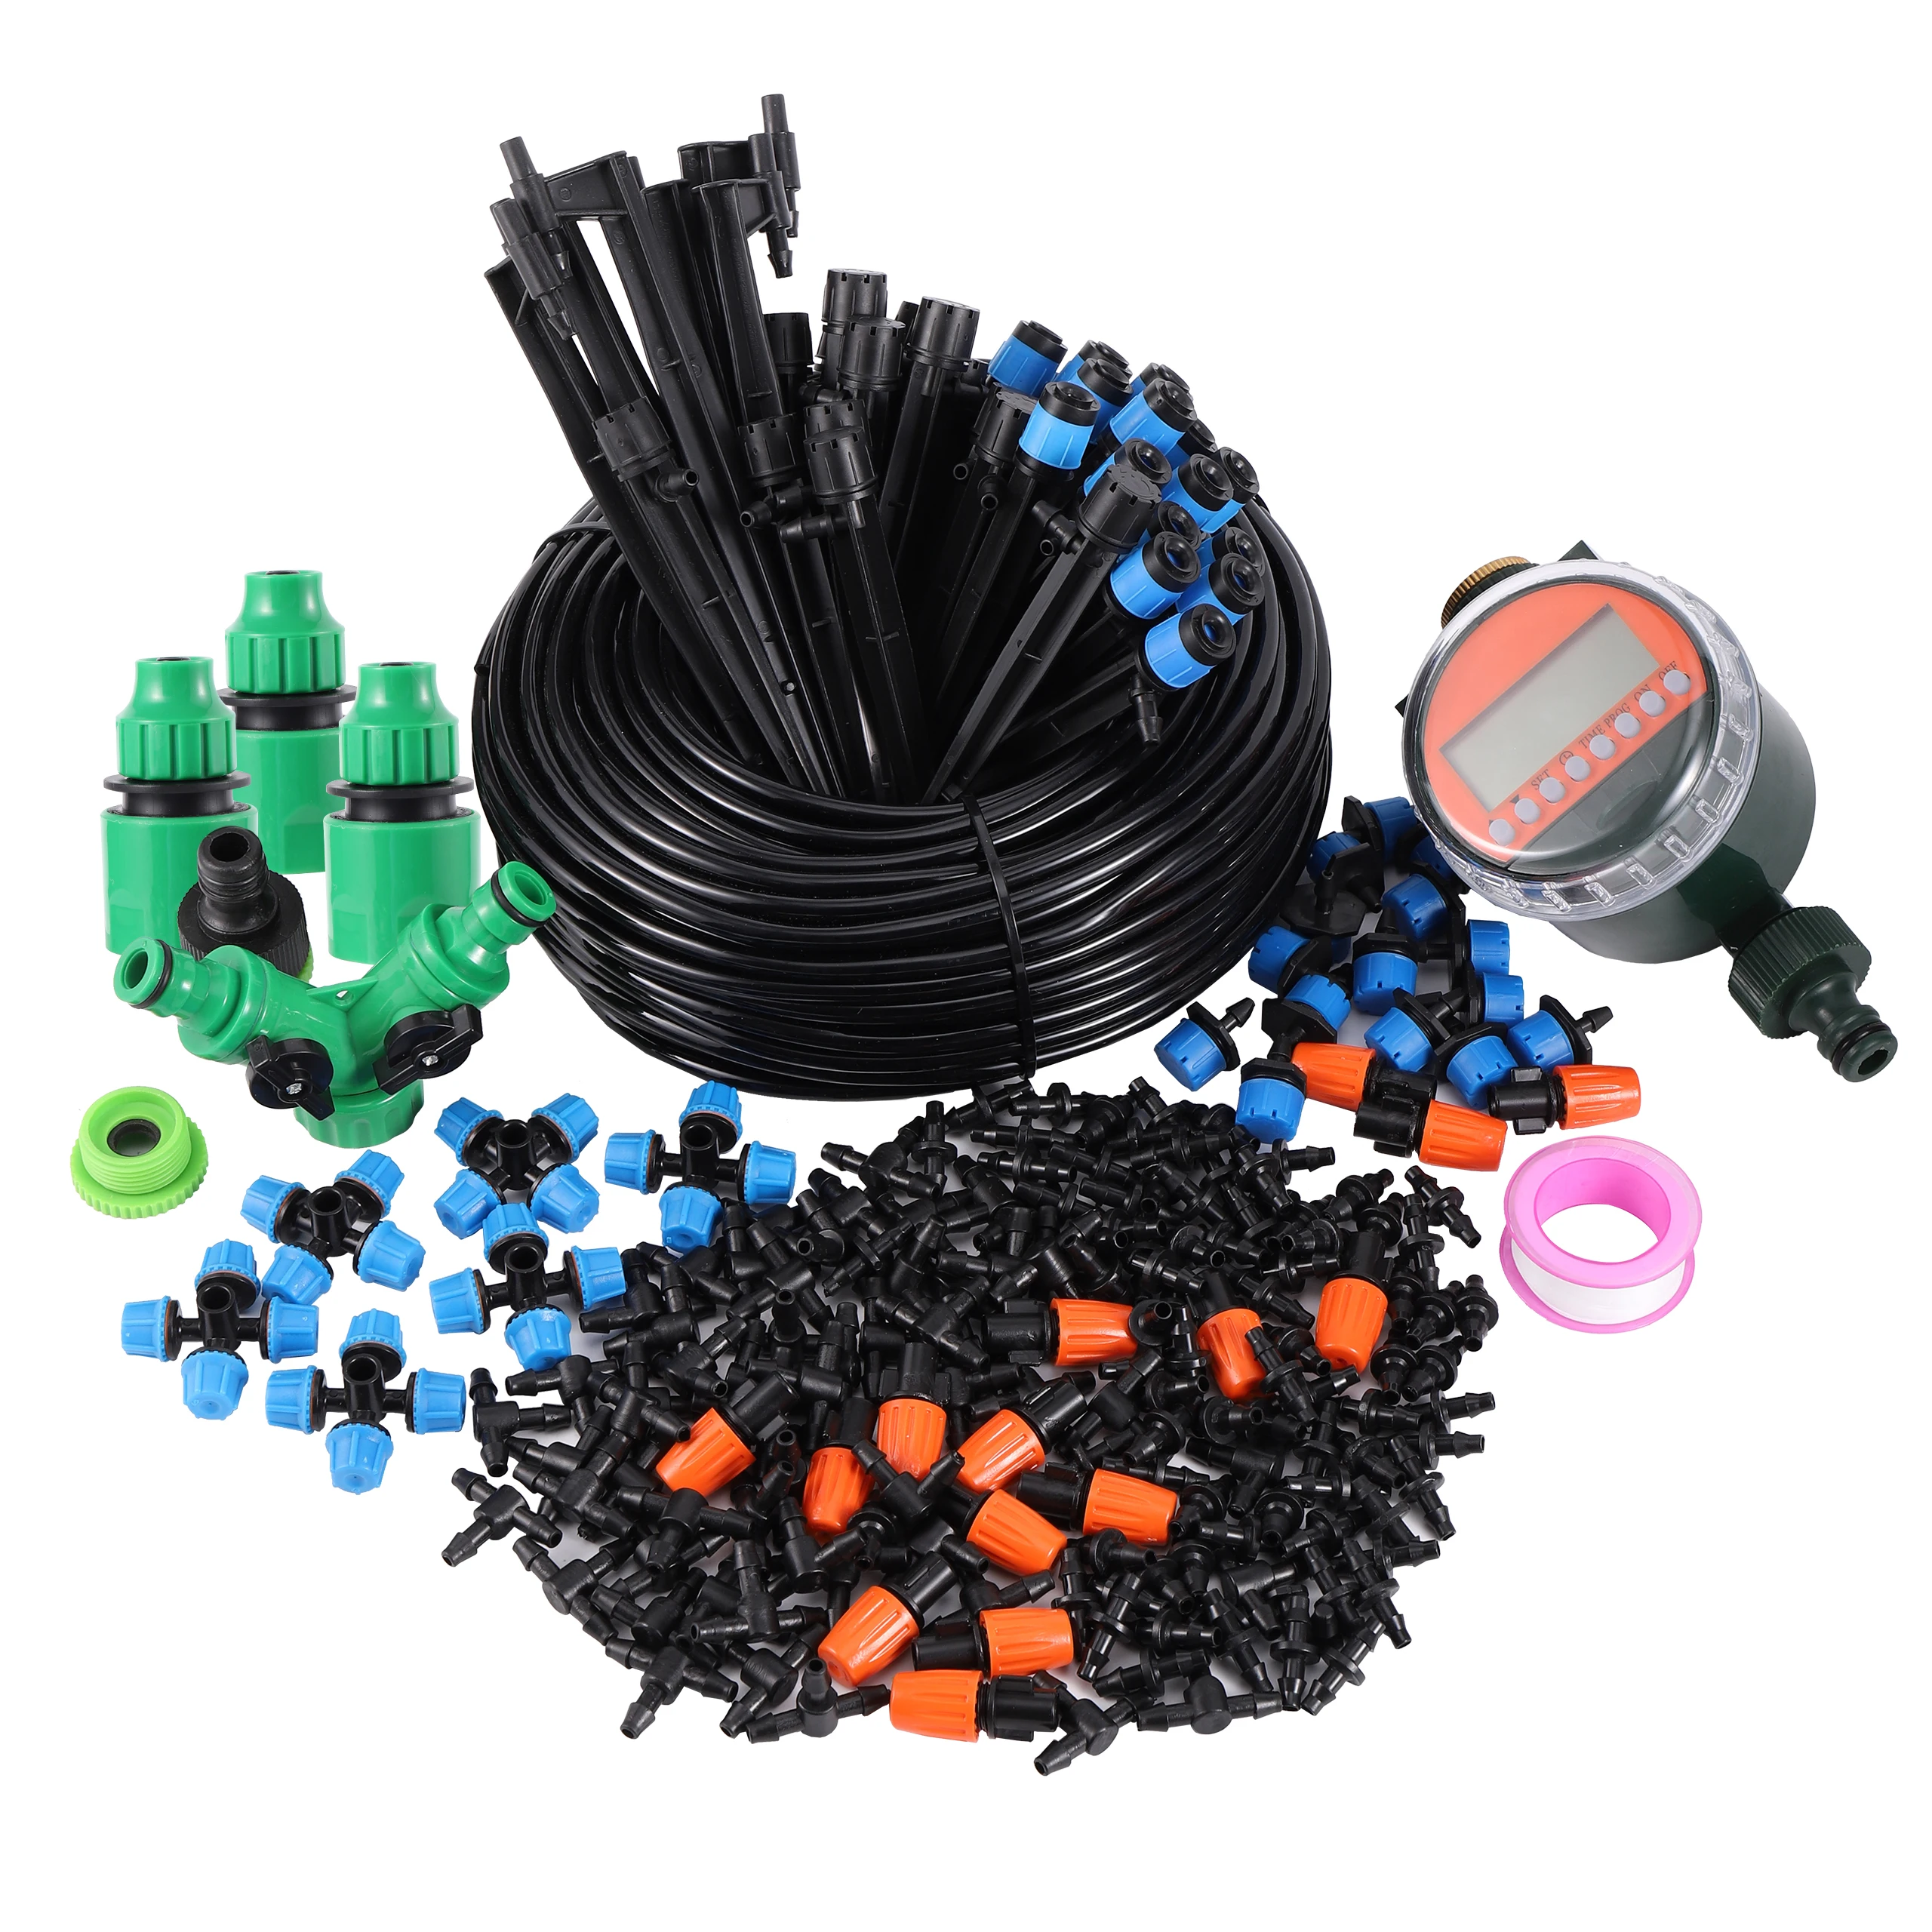 Misting Cooling Irrigation System Automatic Drip Irrigation Set for Garden Lawn Grass Flower With Water Timer Garden Hose Fittings & Valves Lawn & Garden Sprinkler Controls Sprinkler Systems Sprinkler Valves Watering & Irrigation Home & Garden